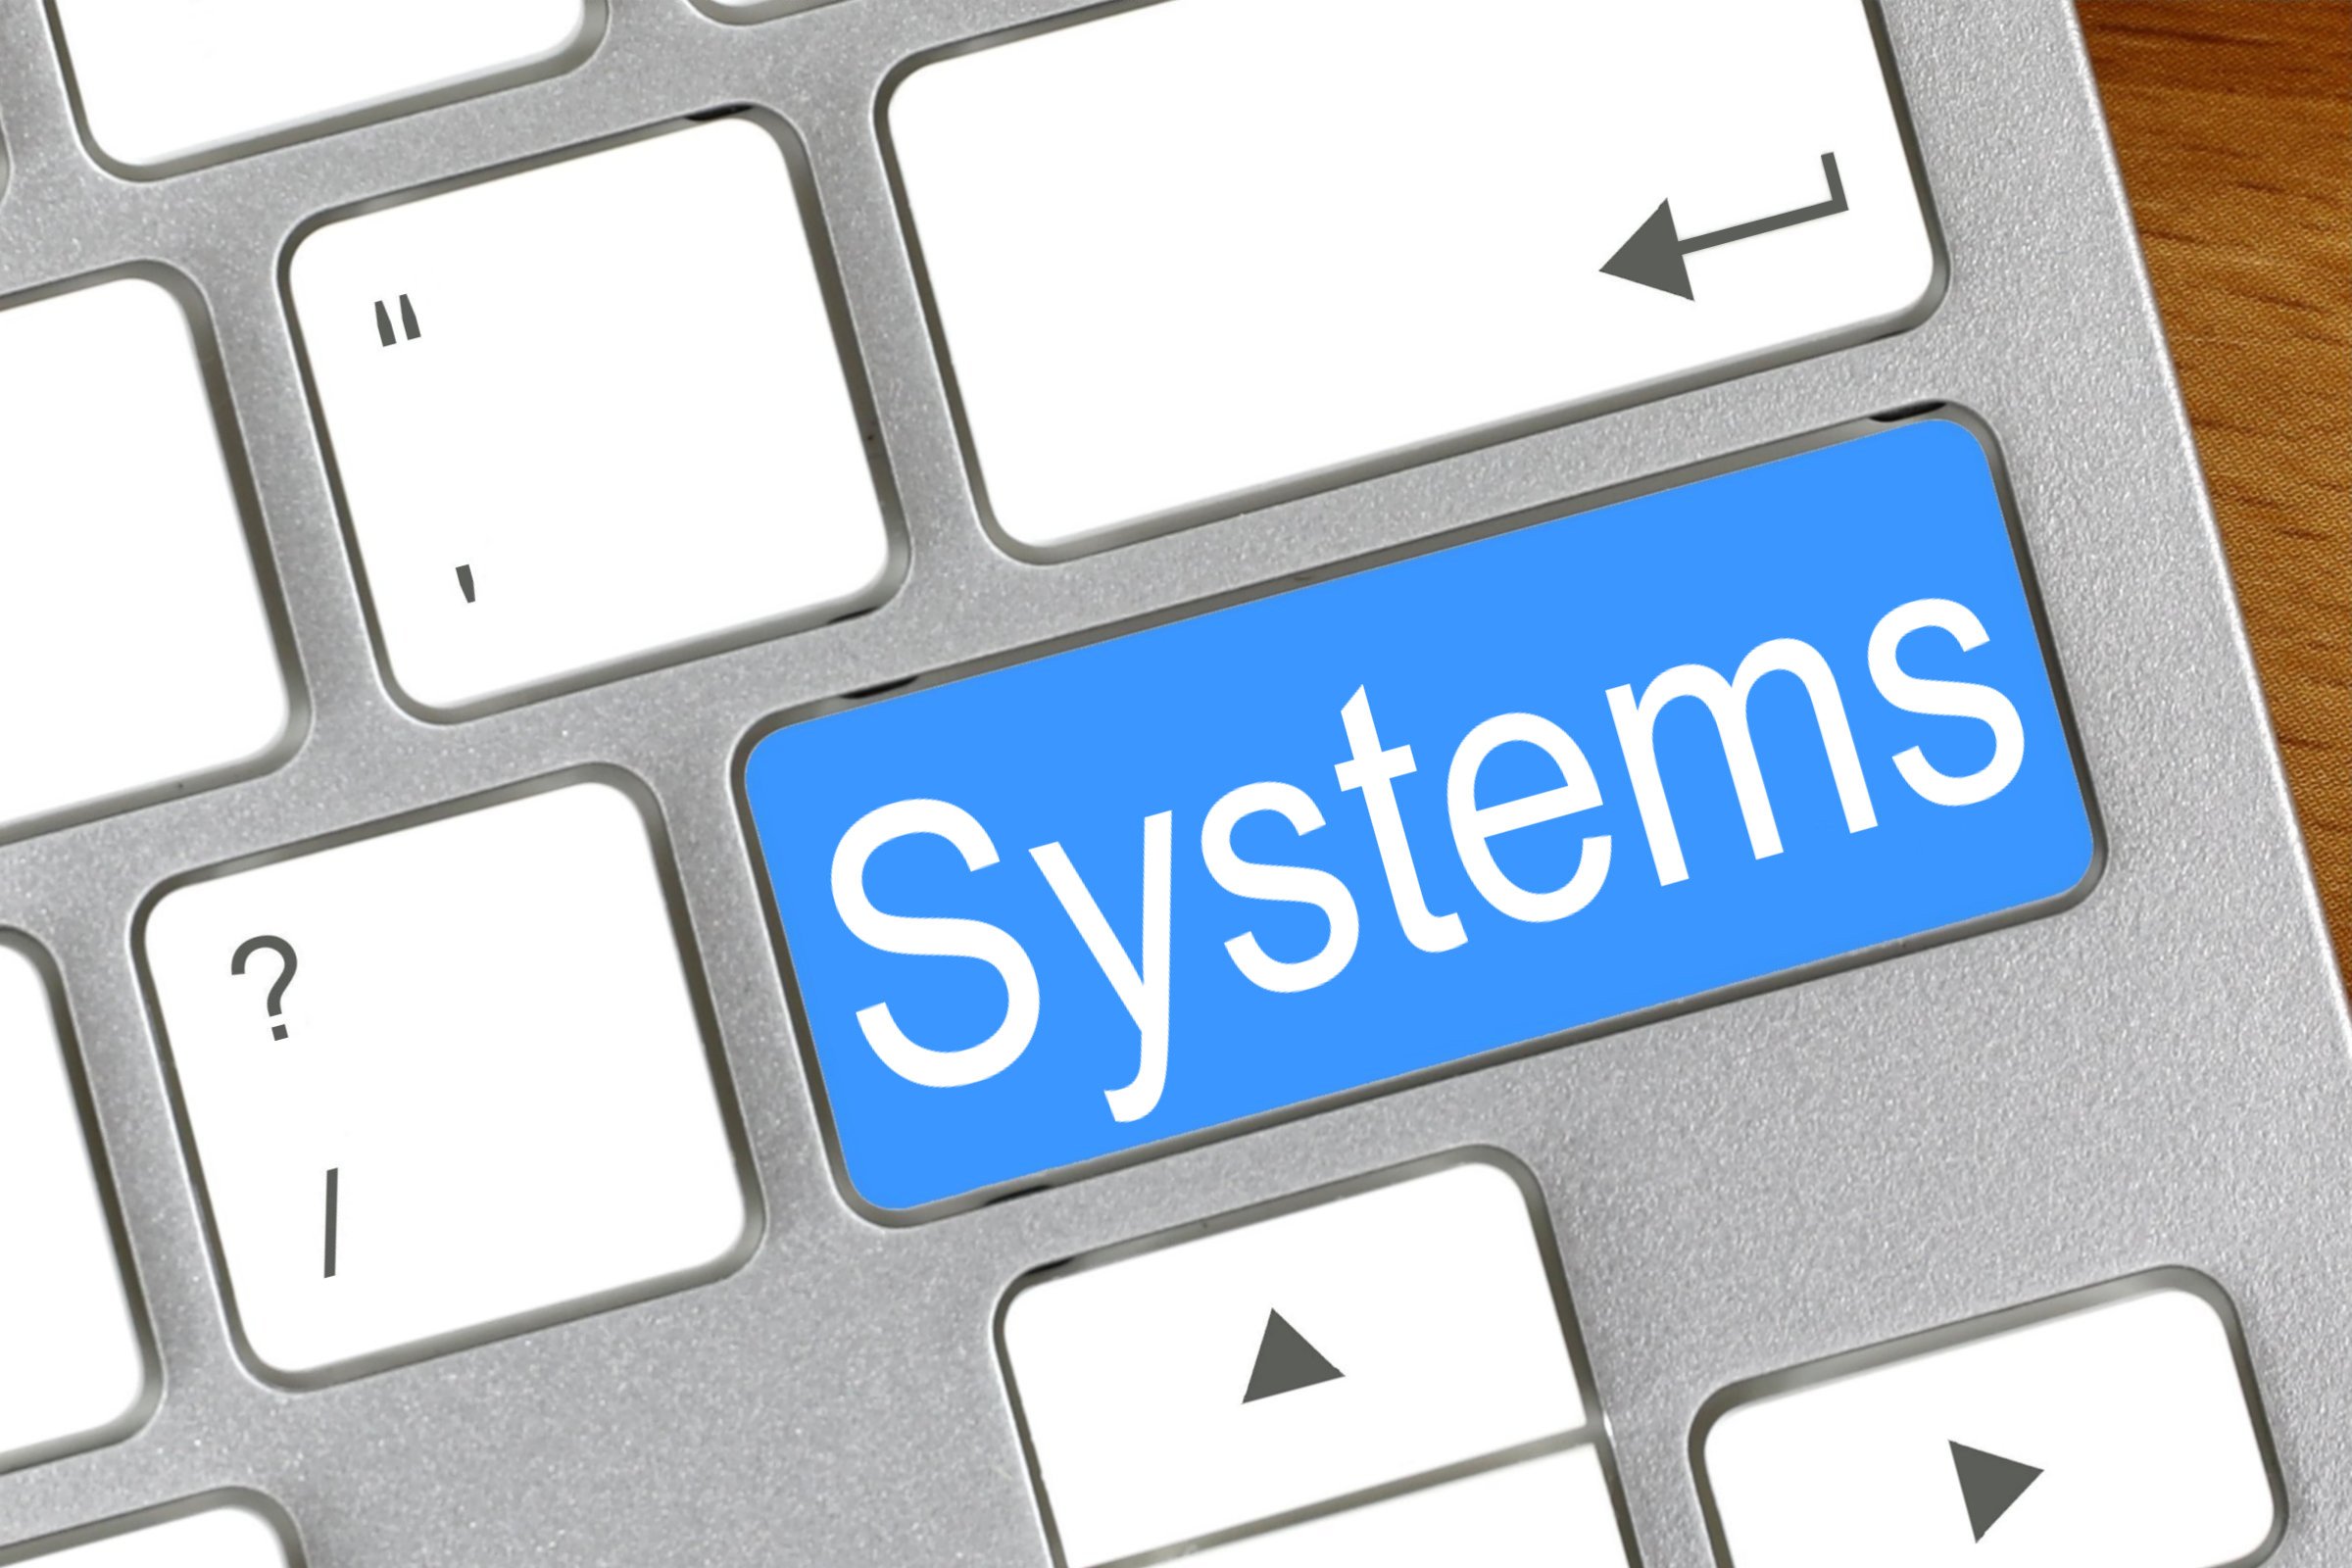 systems